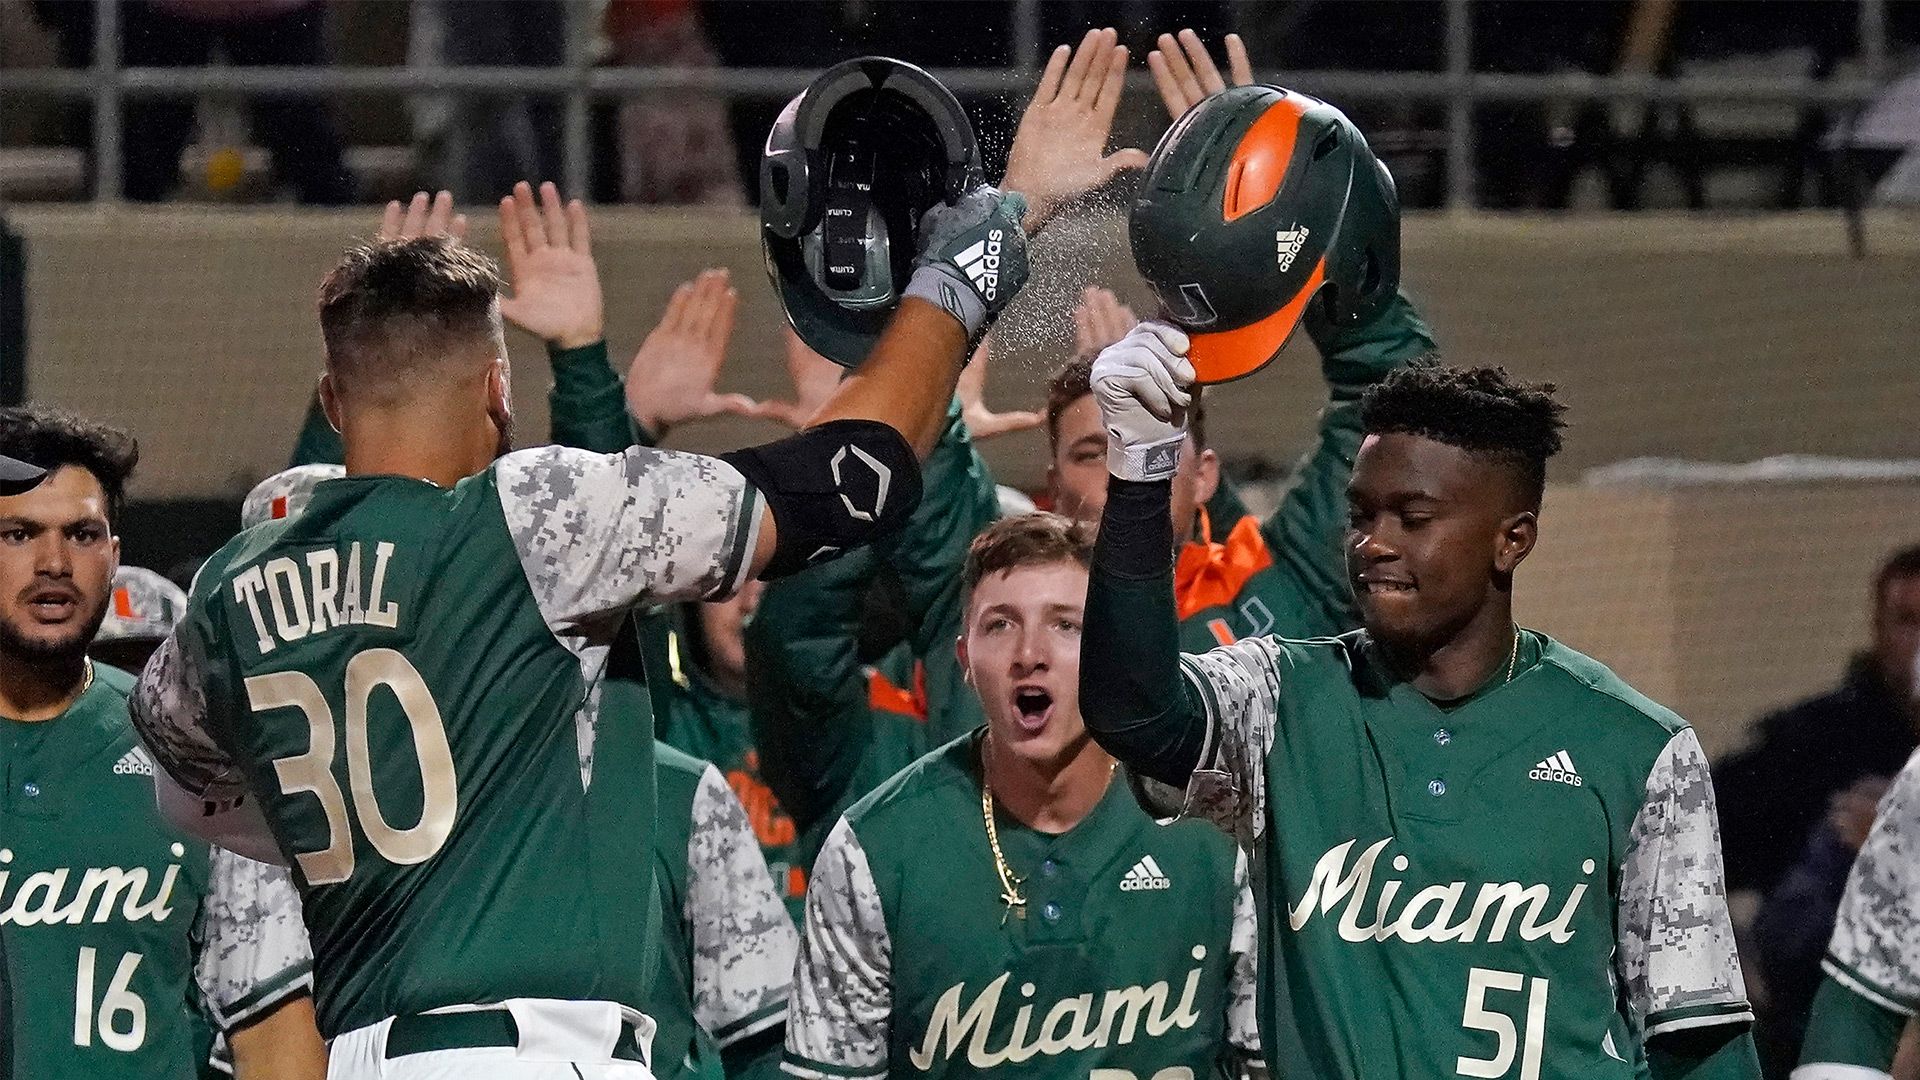 Canes Have Chip on Their Shoulder